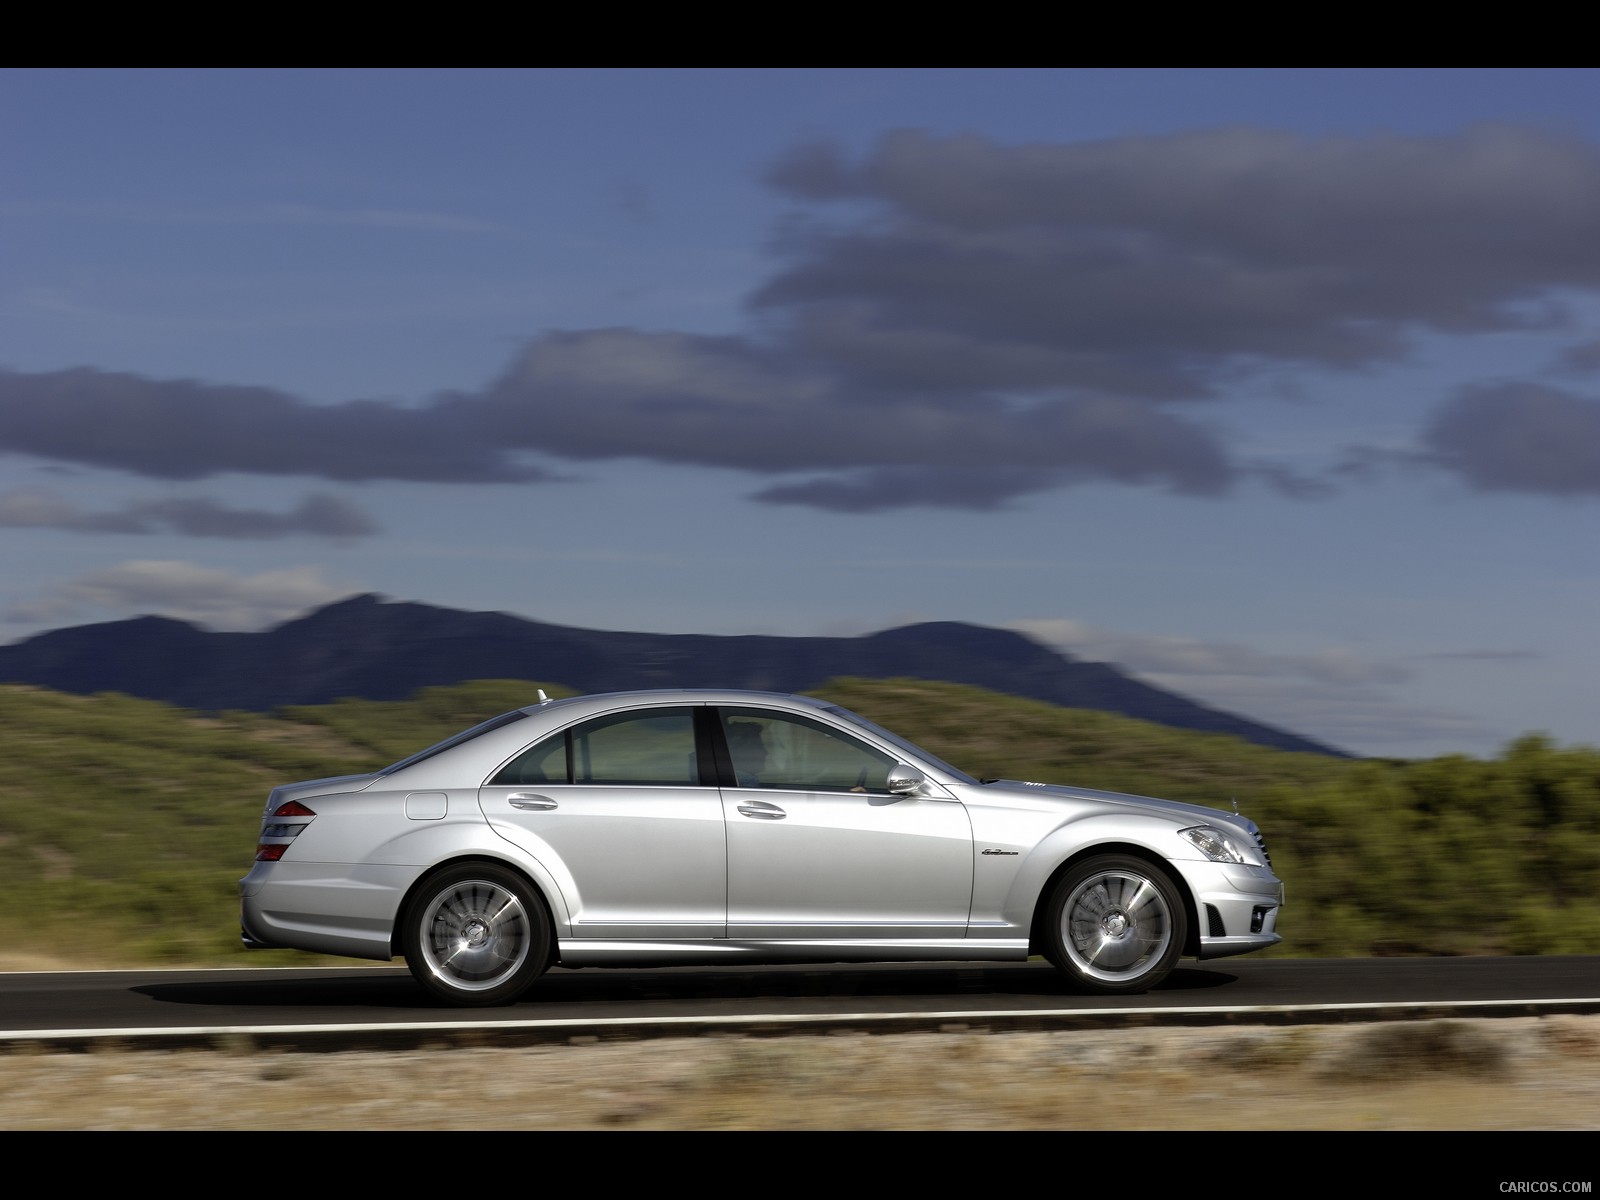 Mercedes-Benz S63 AMG (2010)  - Side, #4 of 12